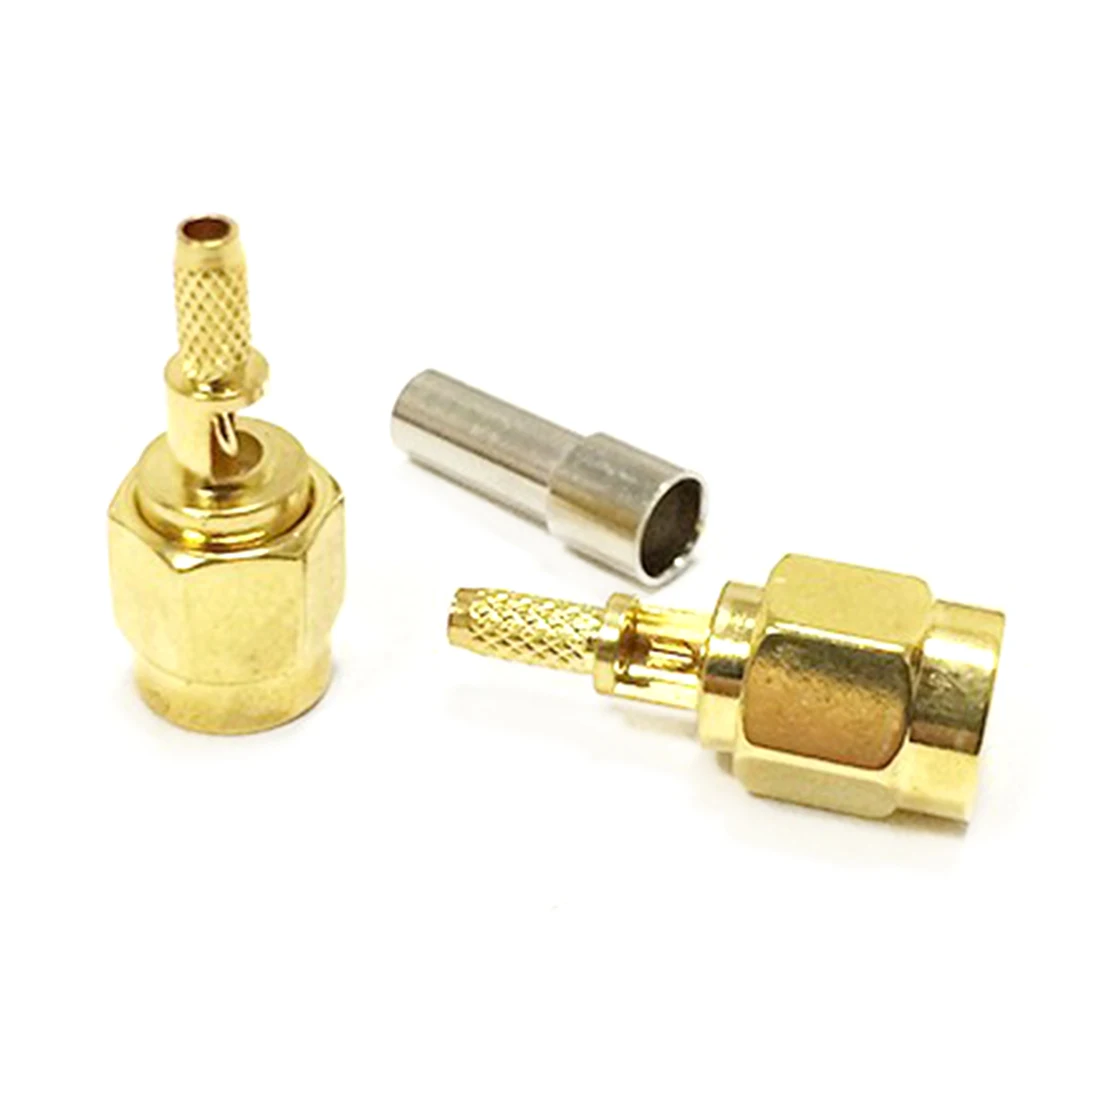 

1pc SMA Male Plug Open Sunroof RF Coax Connector Crimp RG316 RG174 LMR100 Straight Goldplated New Wholesale